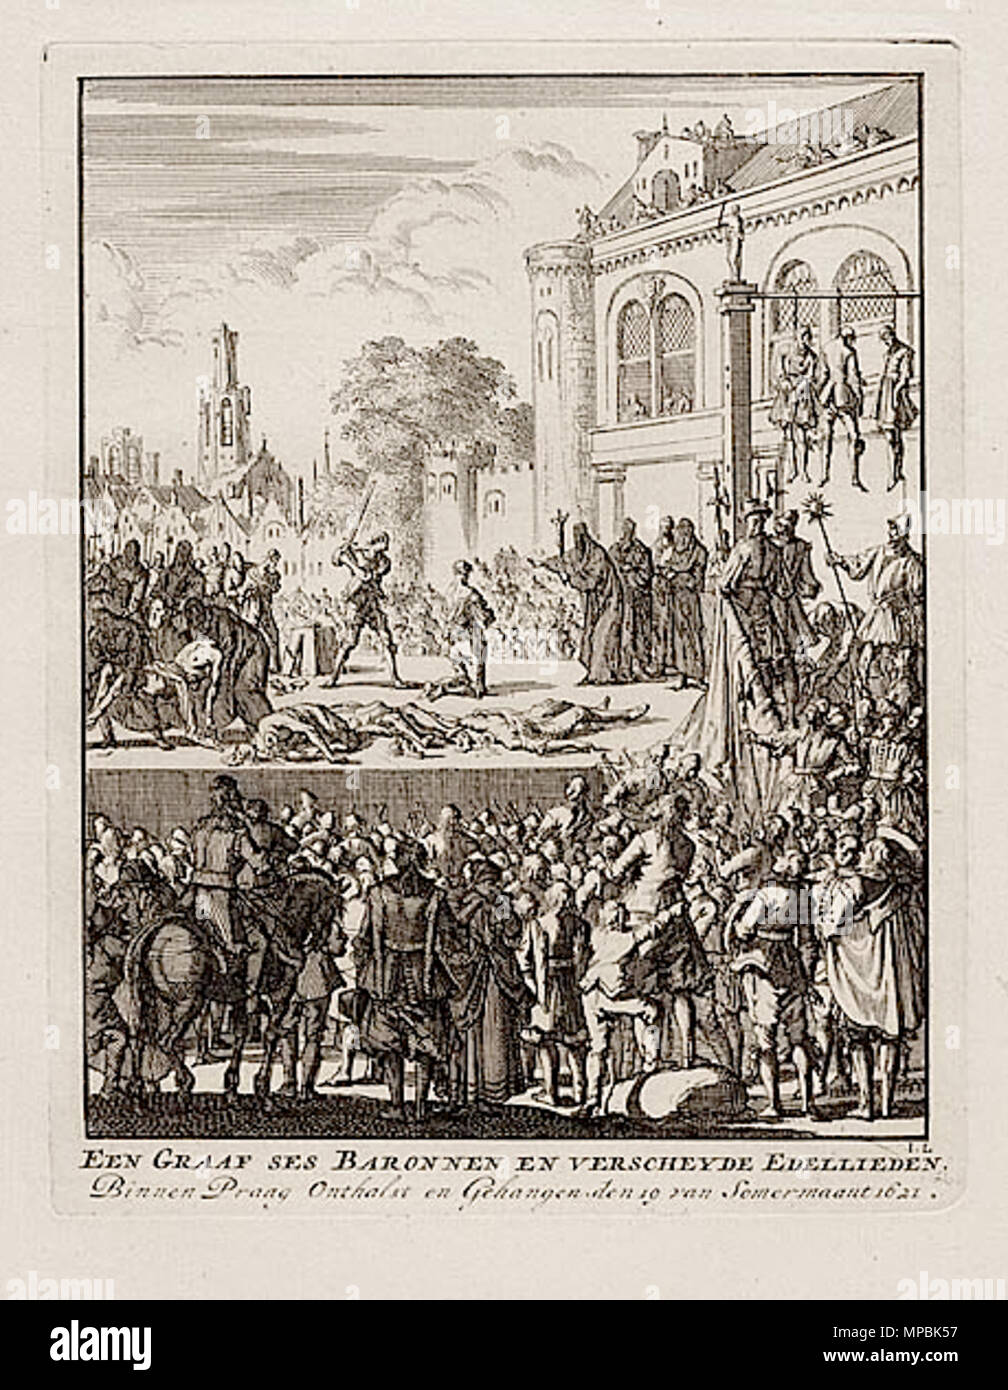 . English: Een Graaf ses Baronnen en Verscheyde Edellieden, etching by Jan Luyken about the Old Time Square Execution in Prague on the 21 June 1621. Jan Luyken. Jan Luyken 940 Old Time Square Execution in Prague 1621 Stock Photo